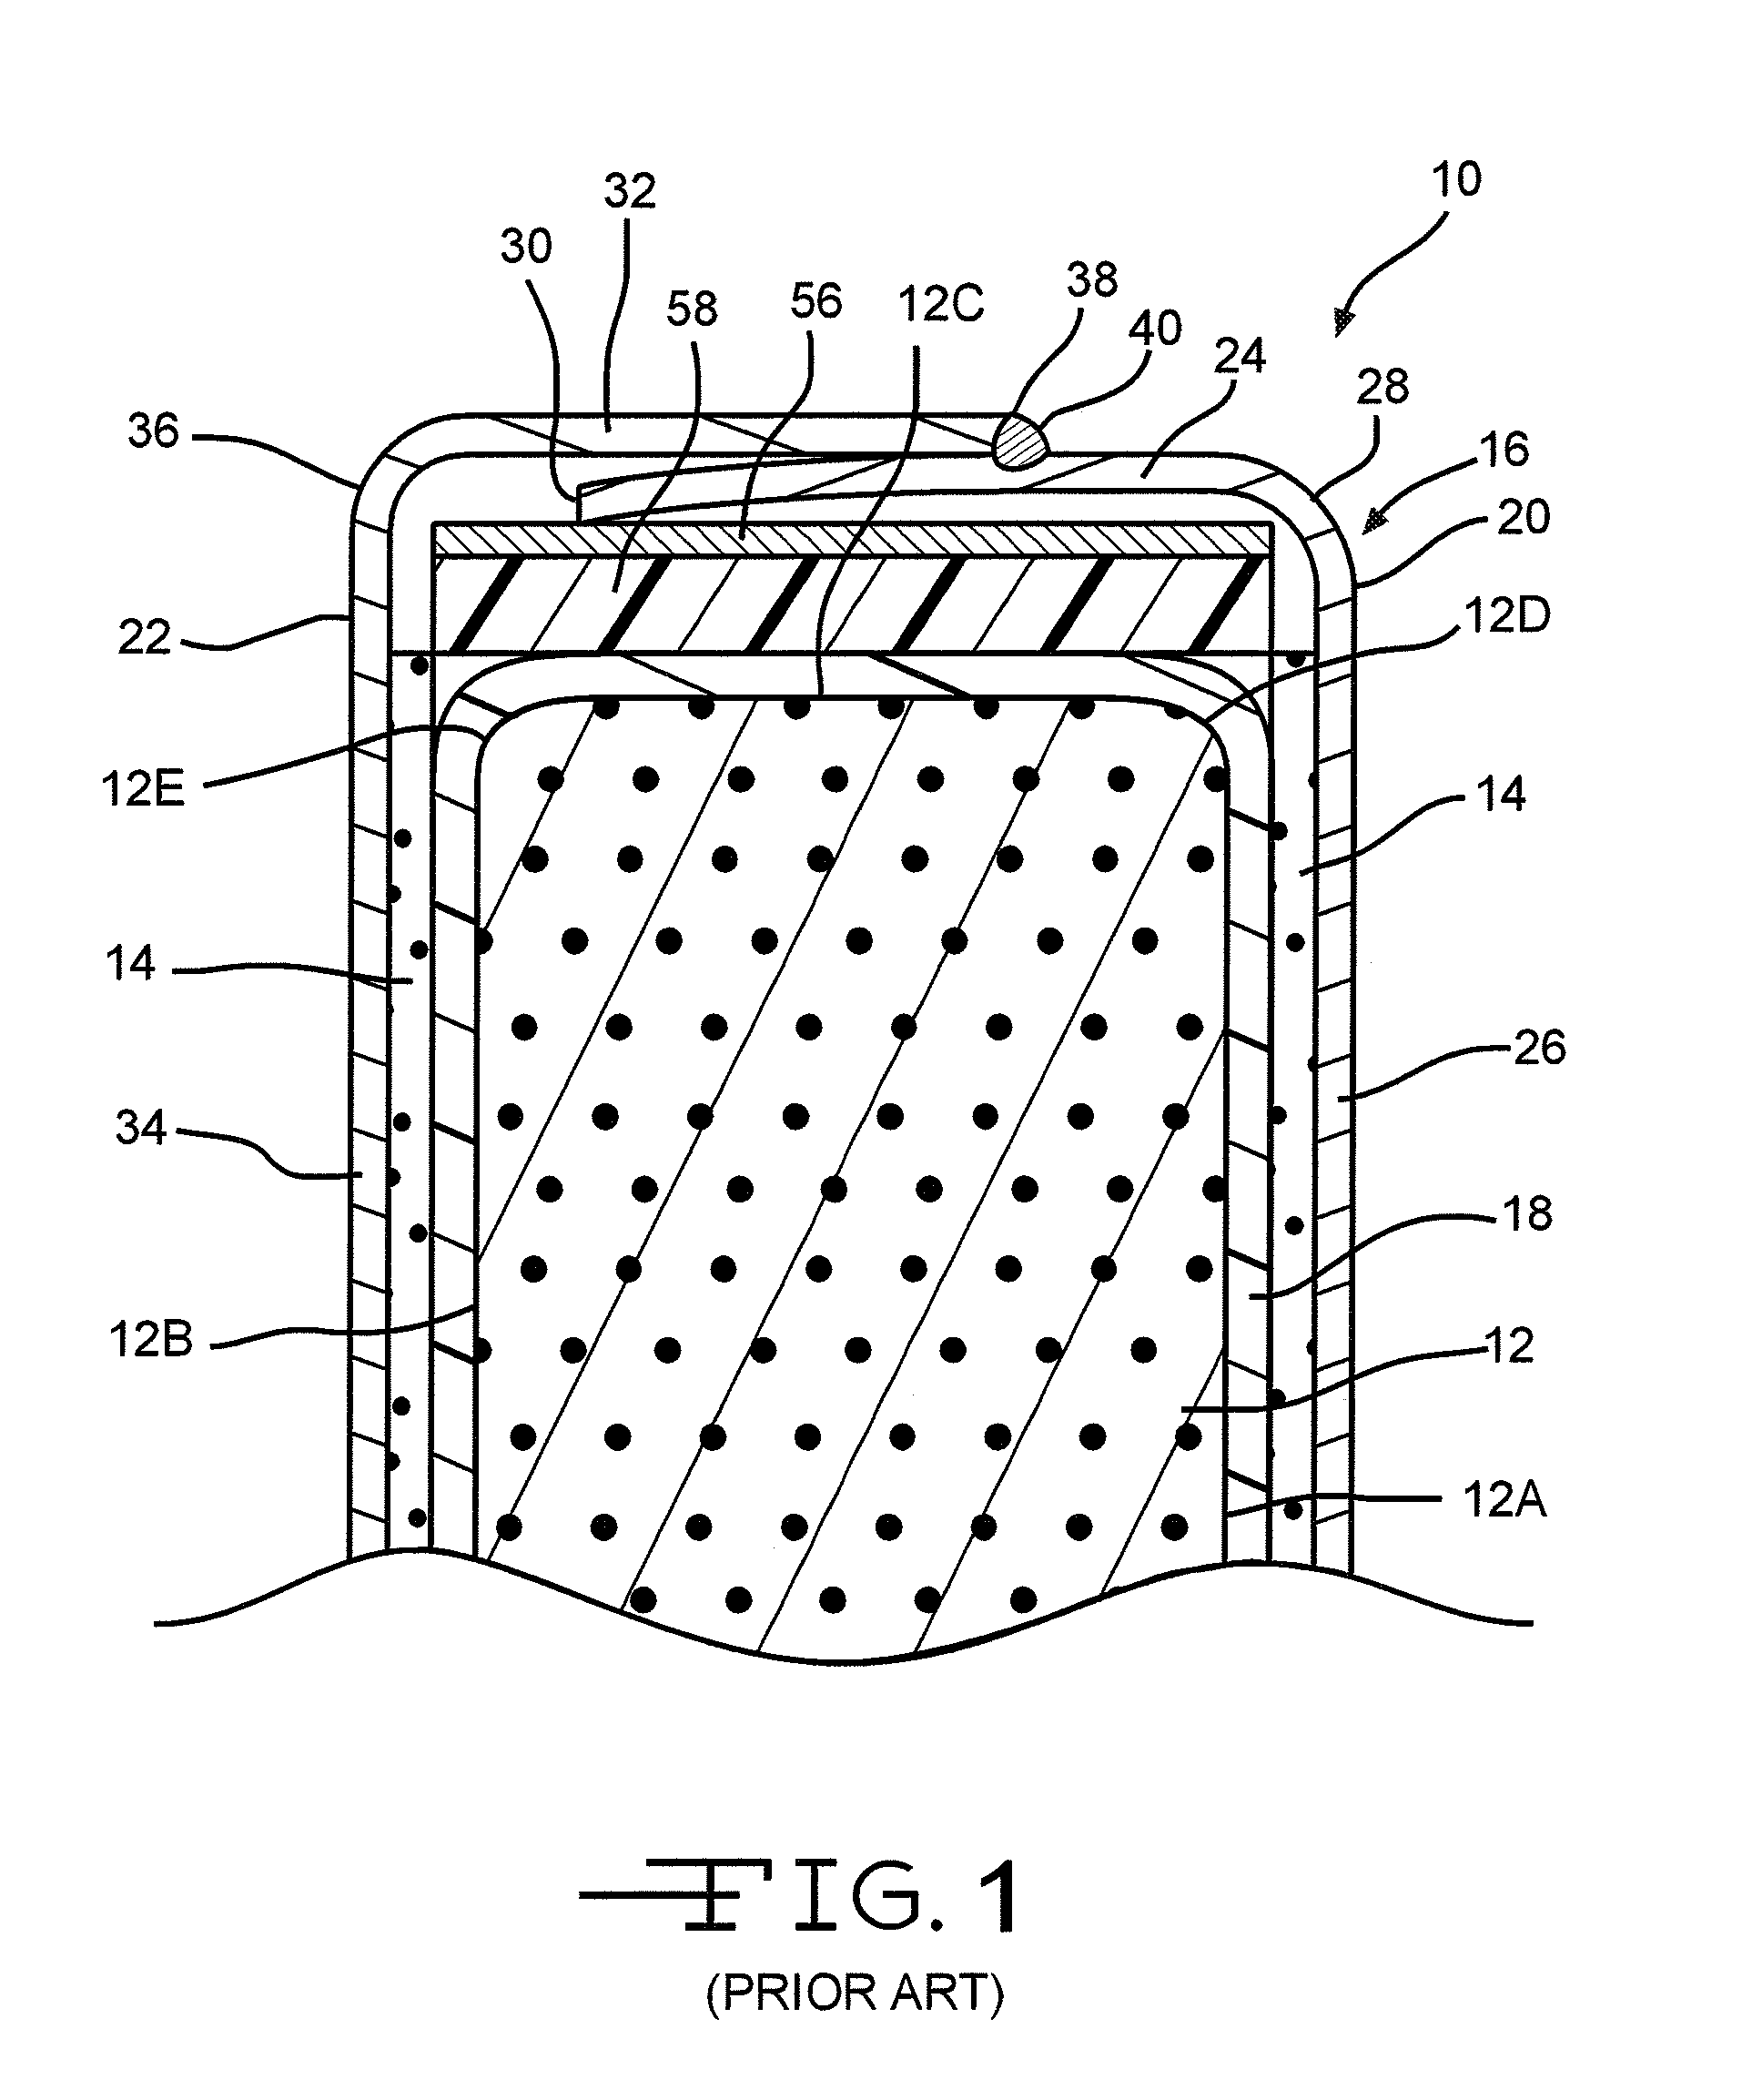 More Energy Dense Electrolytic Capacitor